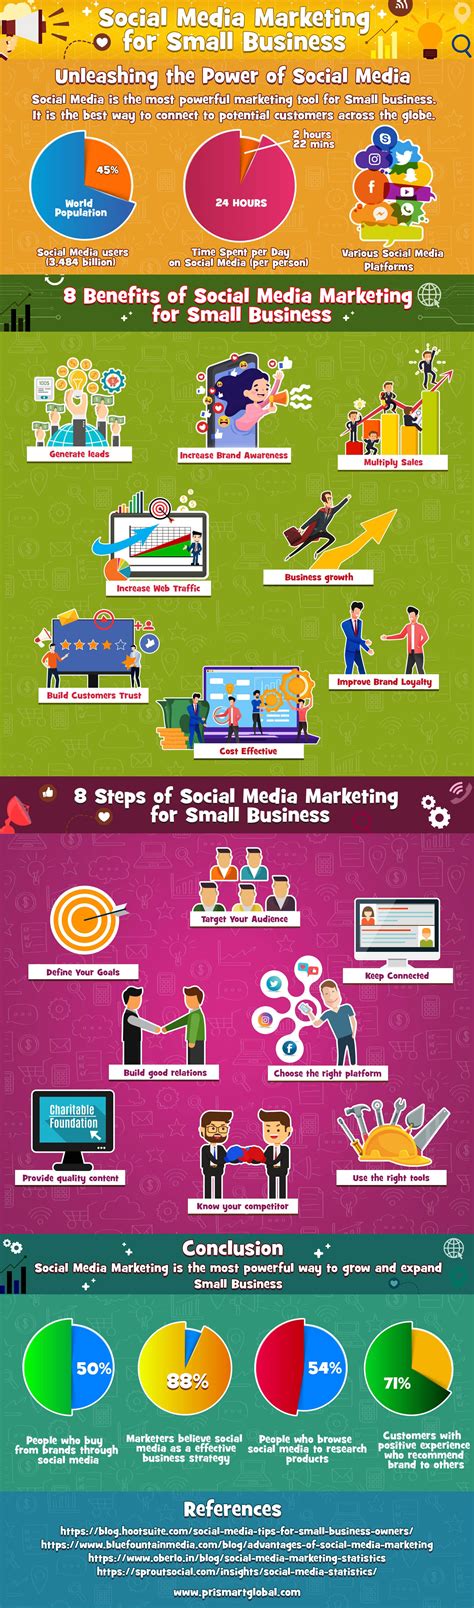 social media infographic examples sheryhive